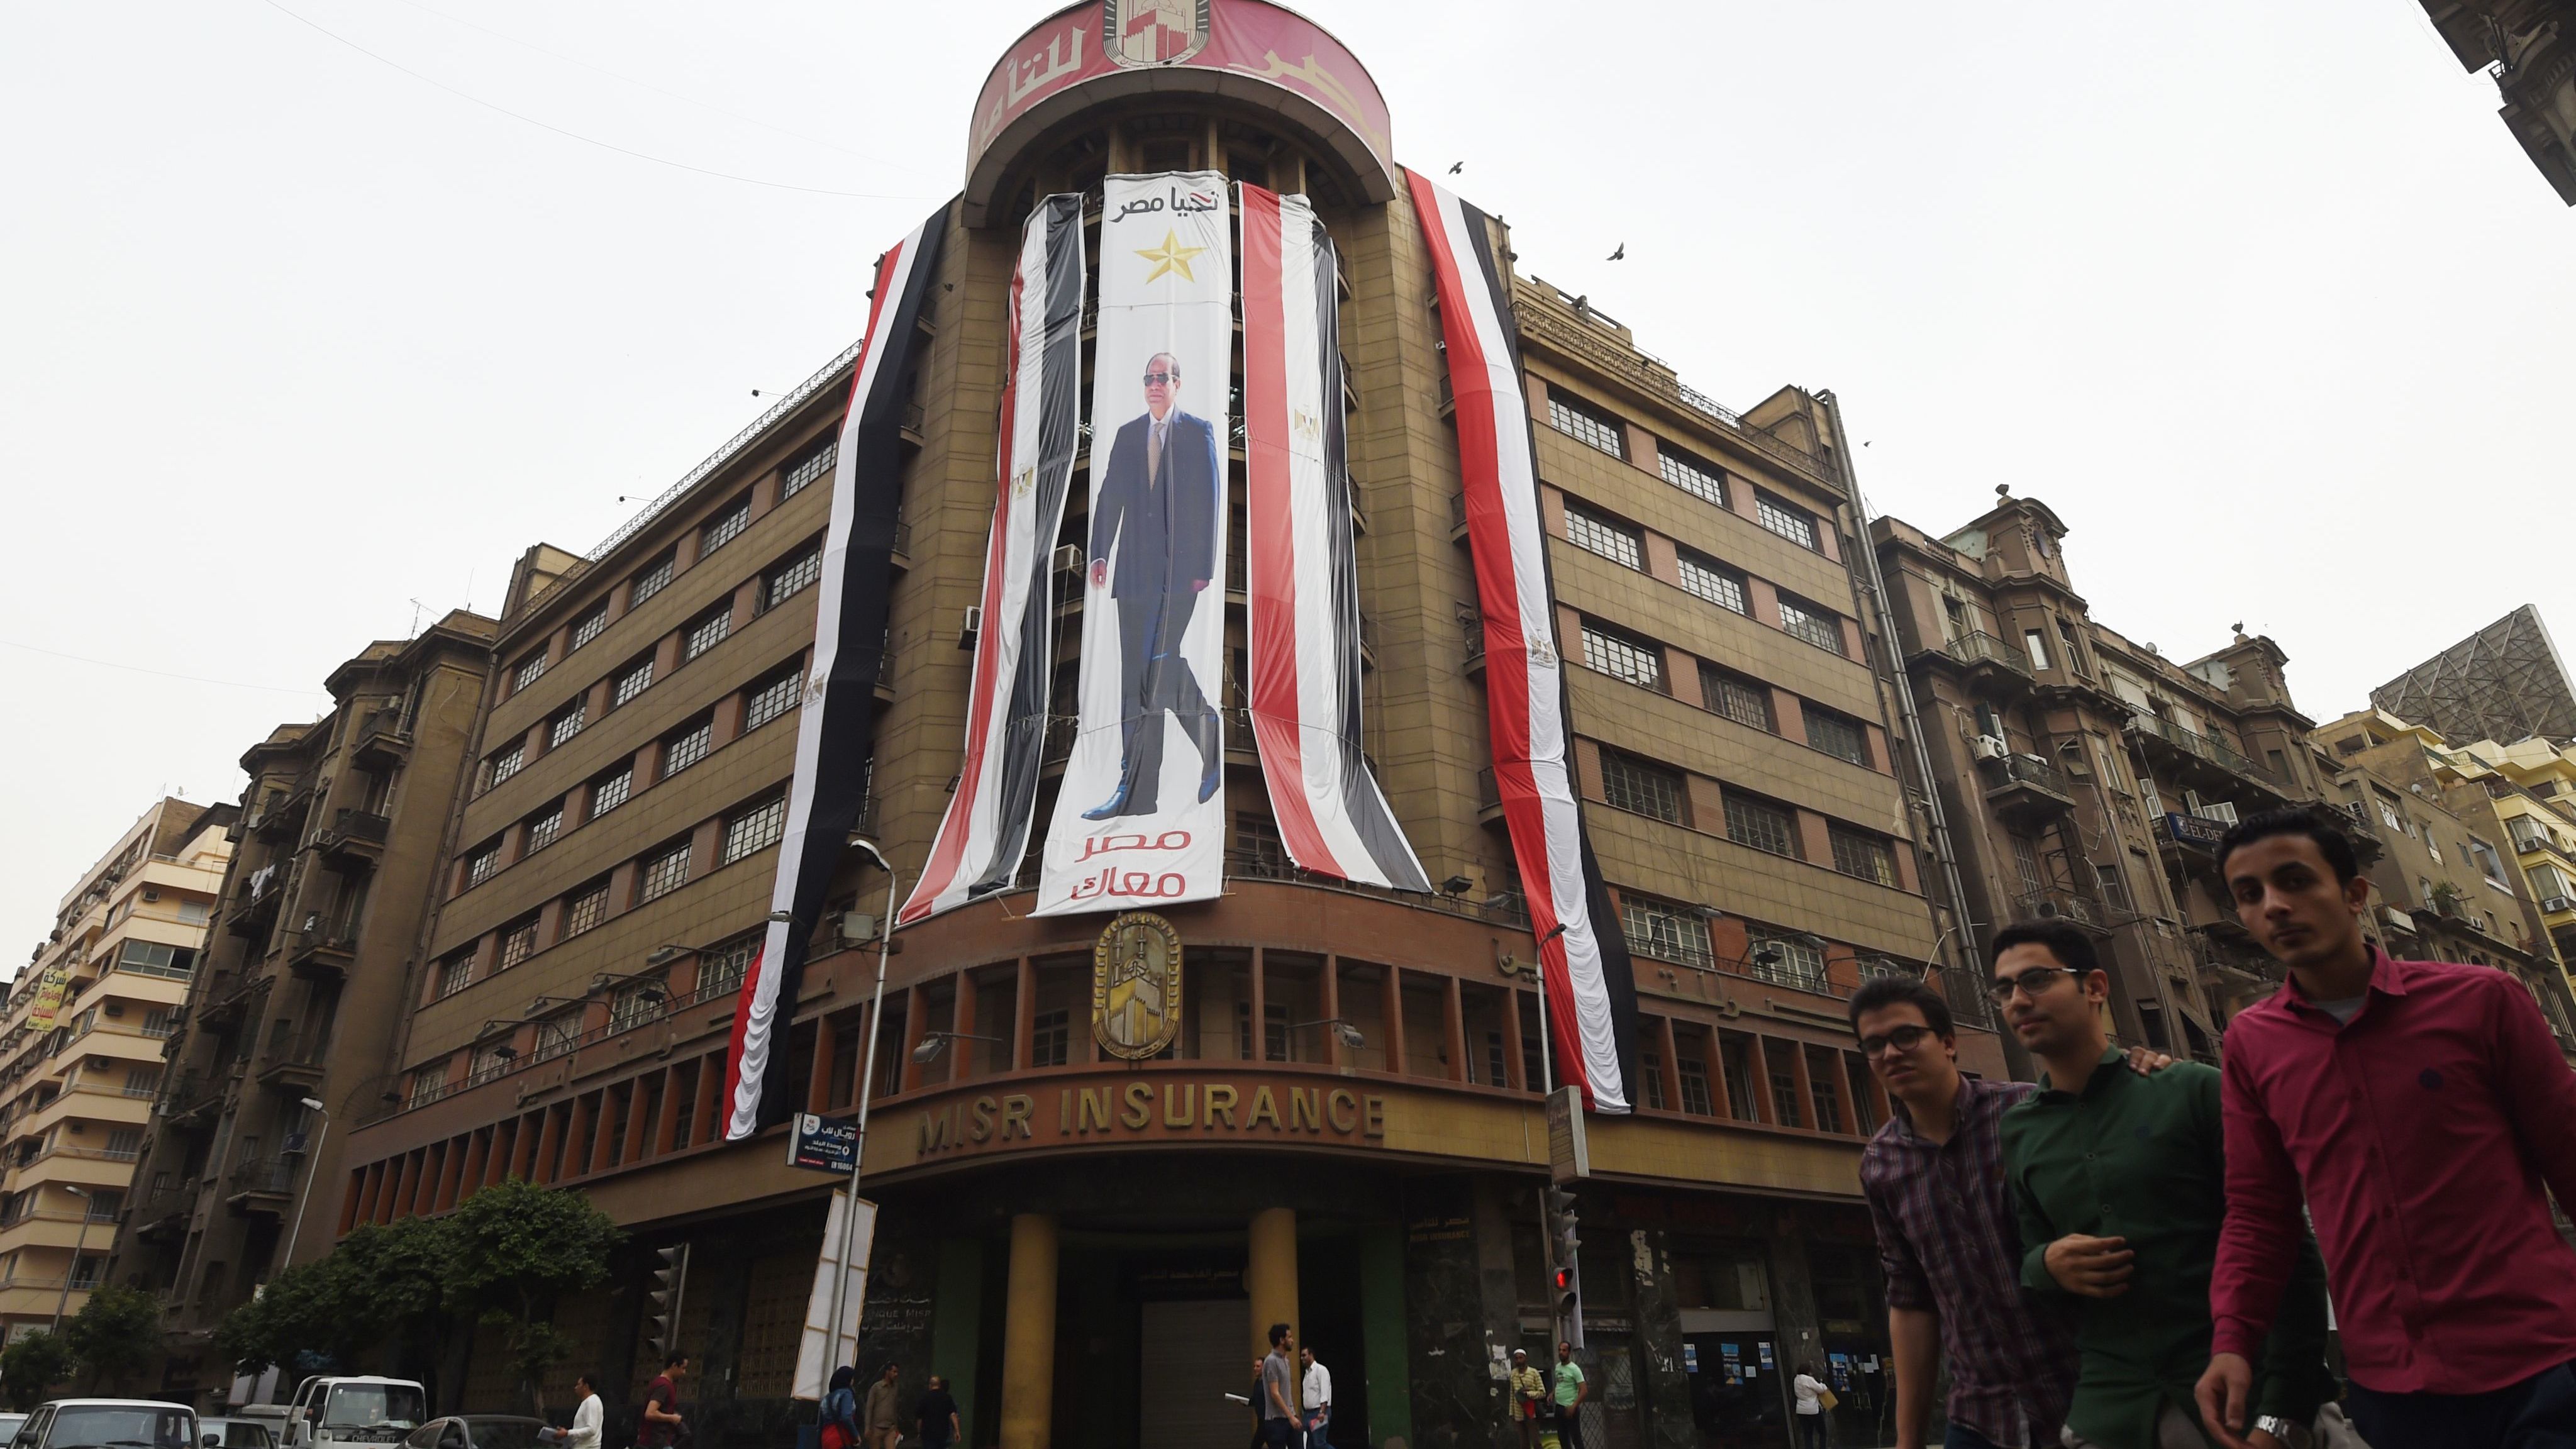 An election poster for President Sisi in central Cairo.